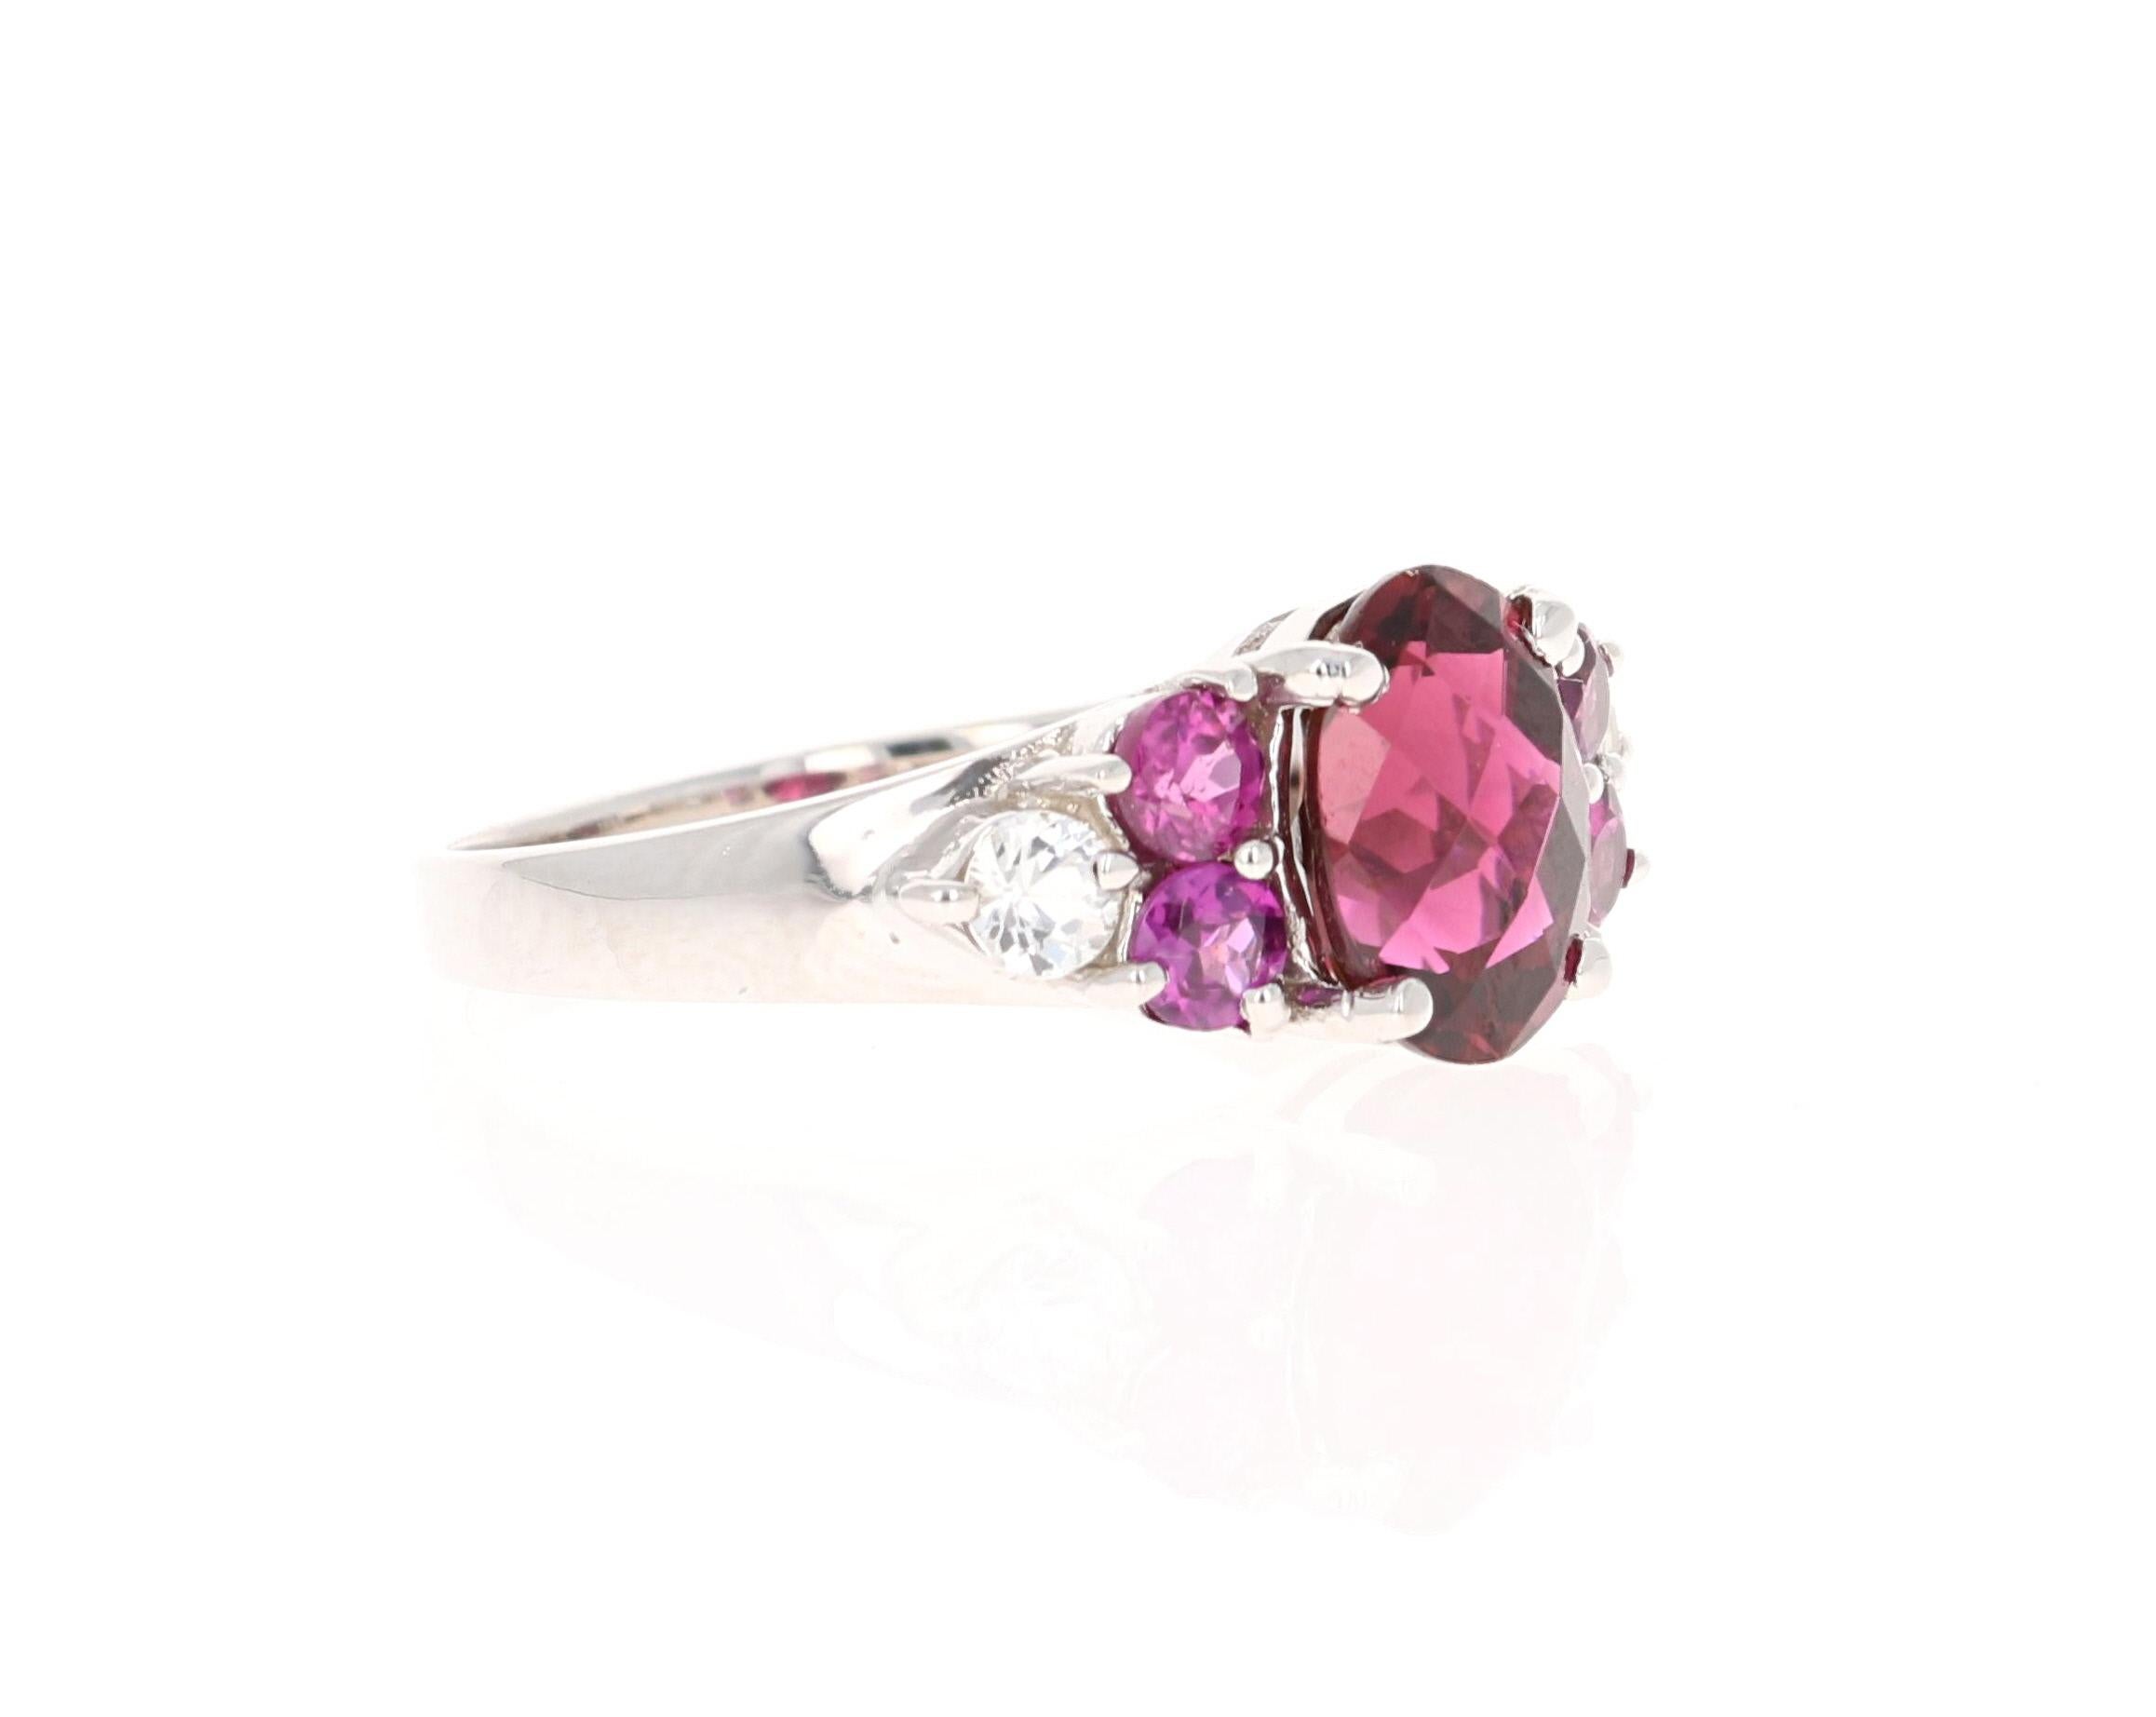 This ring has an Oval-Checkered Cut Purple Tourmaline that weighs 2.50 carats. There are 4 Purple Garnets and 2 White Sapphires that weigh 1.26 carats. The total carat weight of the ring is 3.76 carats. 

This ring is casted in 14K Yellow Gold and